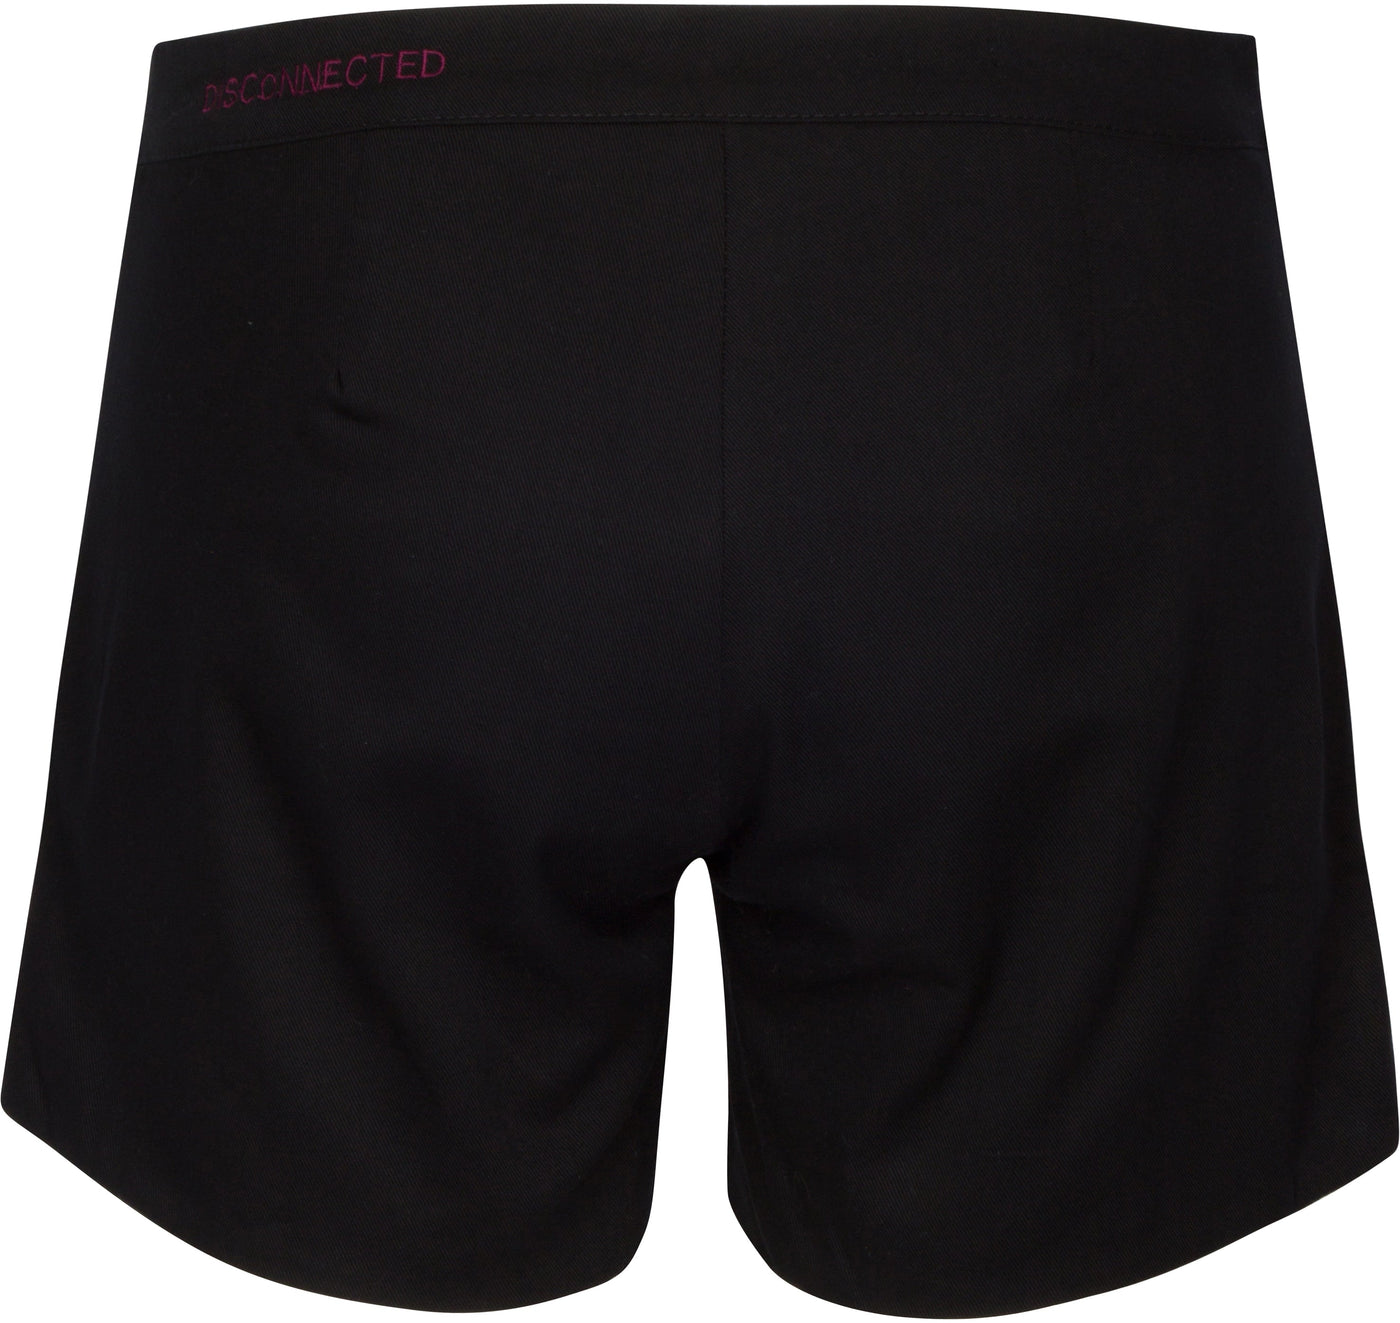 Back image of black cotton twill shorts with disconnected embroidered on wearer's left waistband